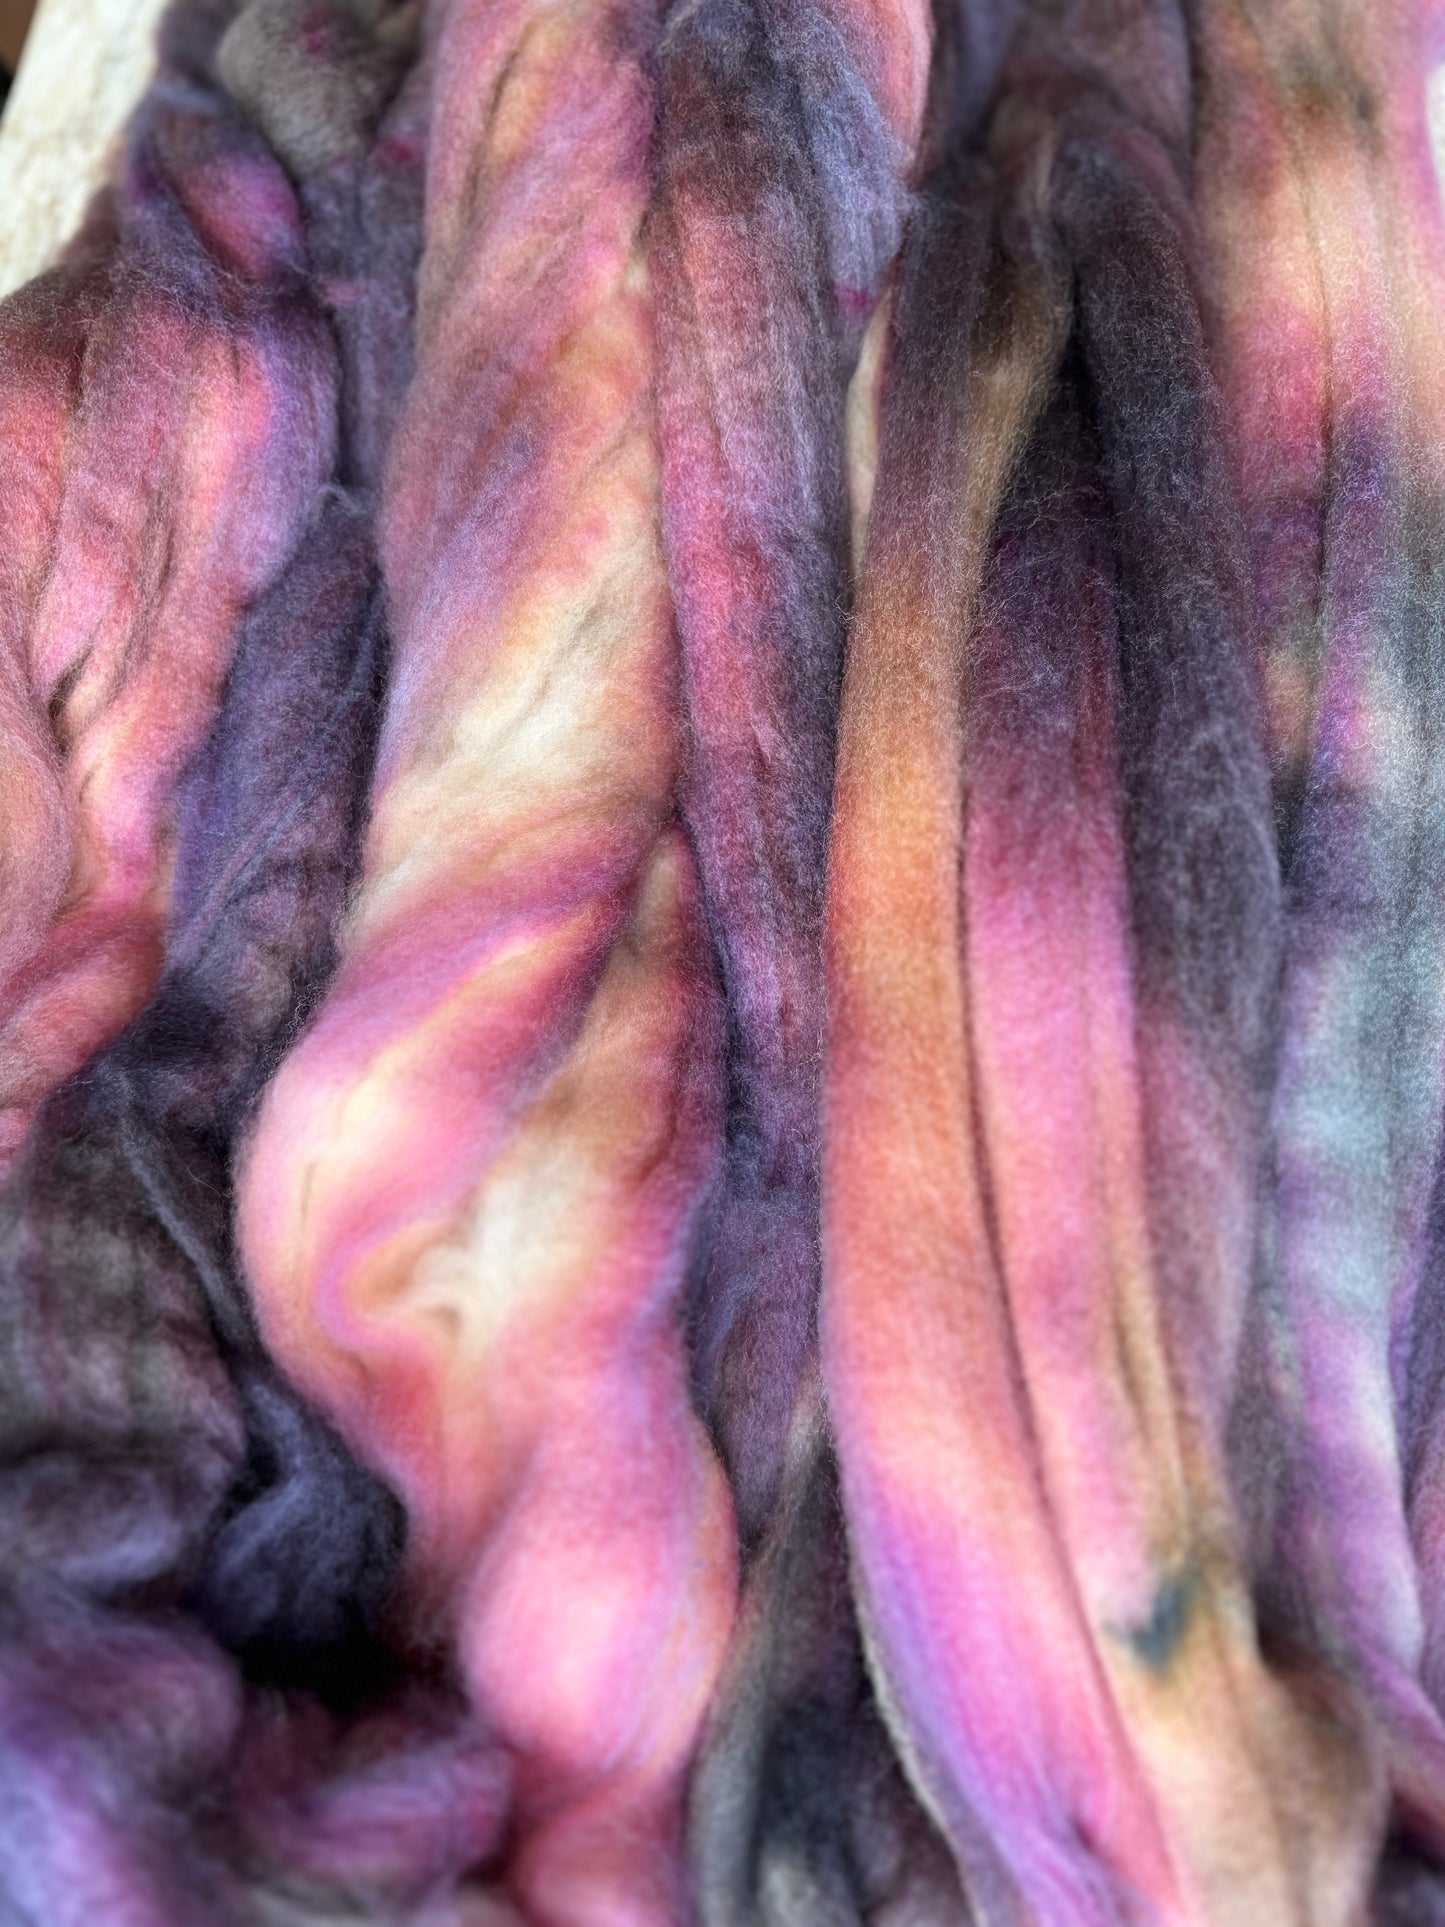 100 grams of Spinning Fibre - Superwash Merino Wool 22 Micron - Hand Dyed Combed Top